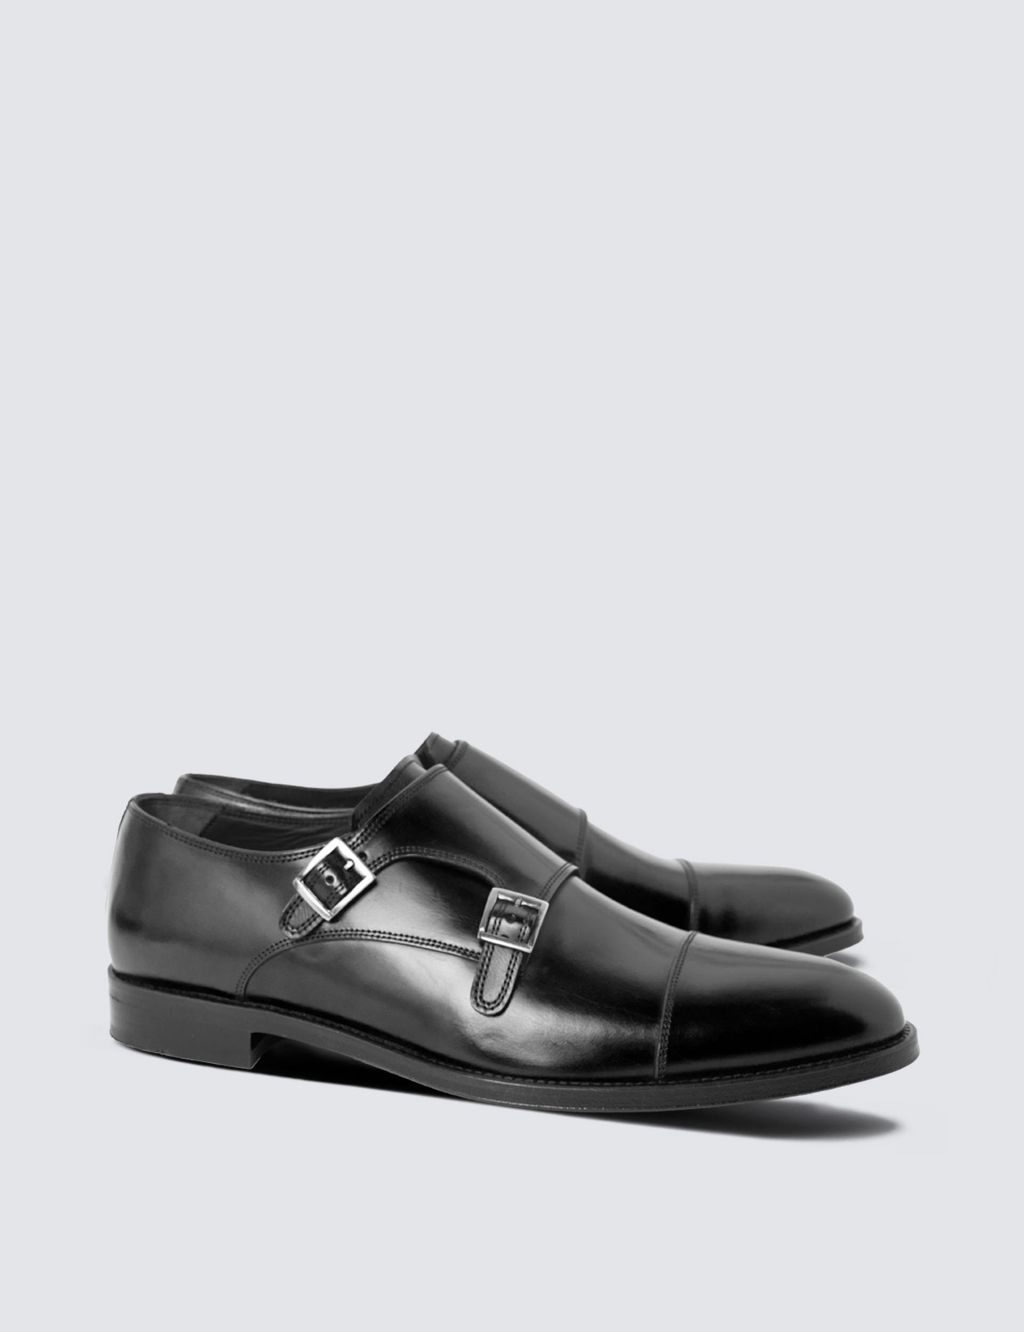 Wide Fit Leather Double Monk Strap Shoes image 1